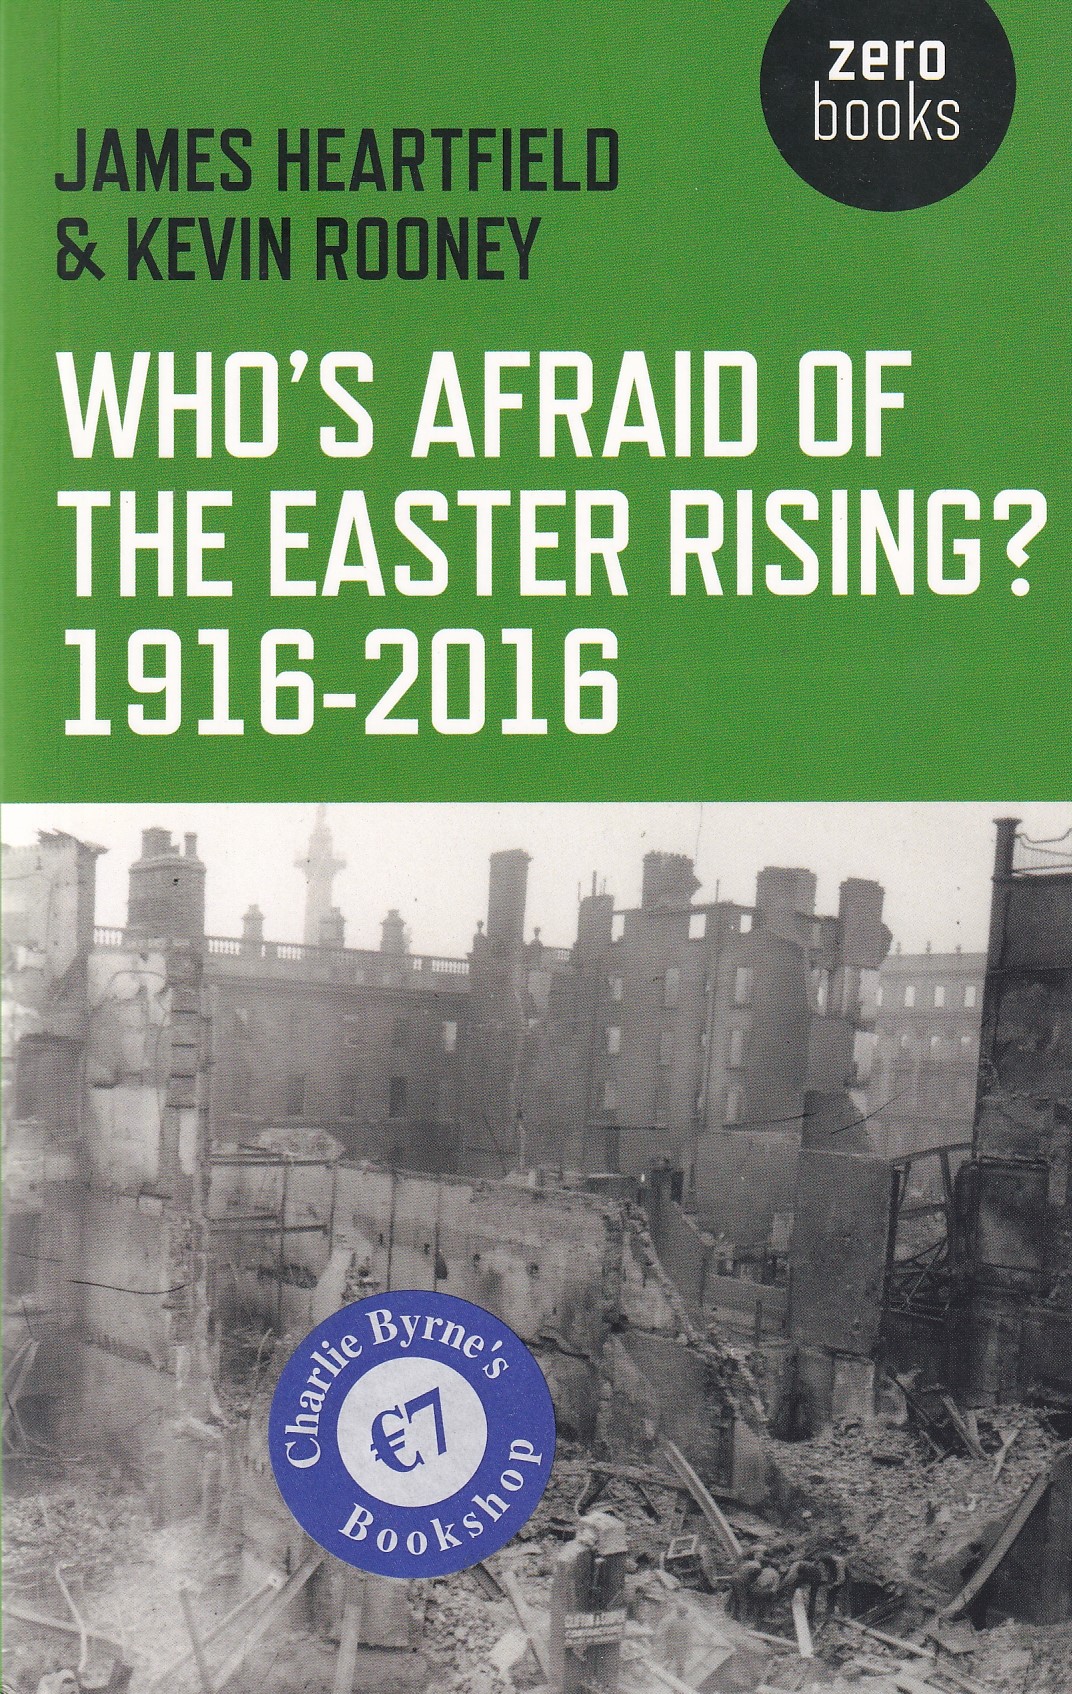 Who’s Afraid of the Easter Rising? by Heartfield, James & Rooney, Kevin